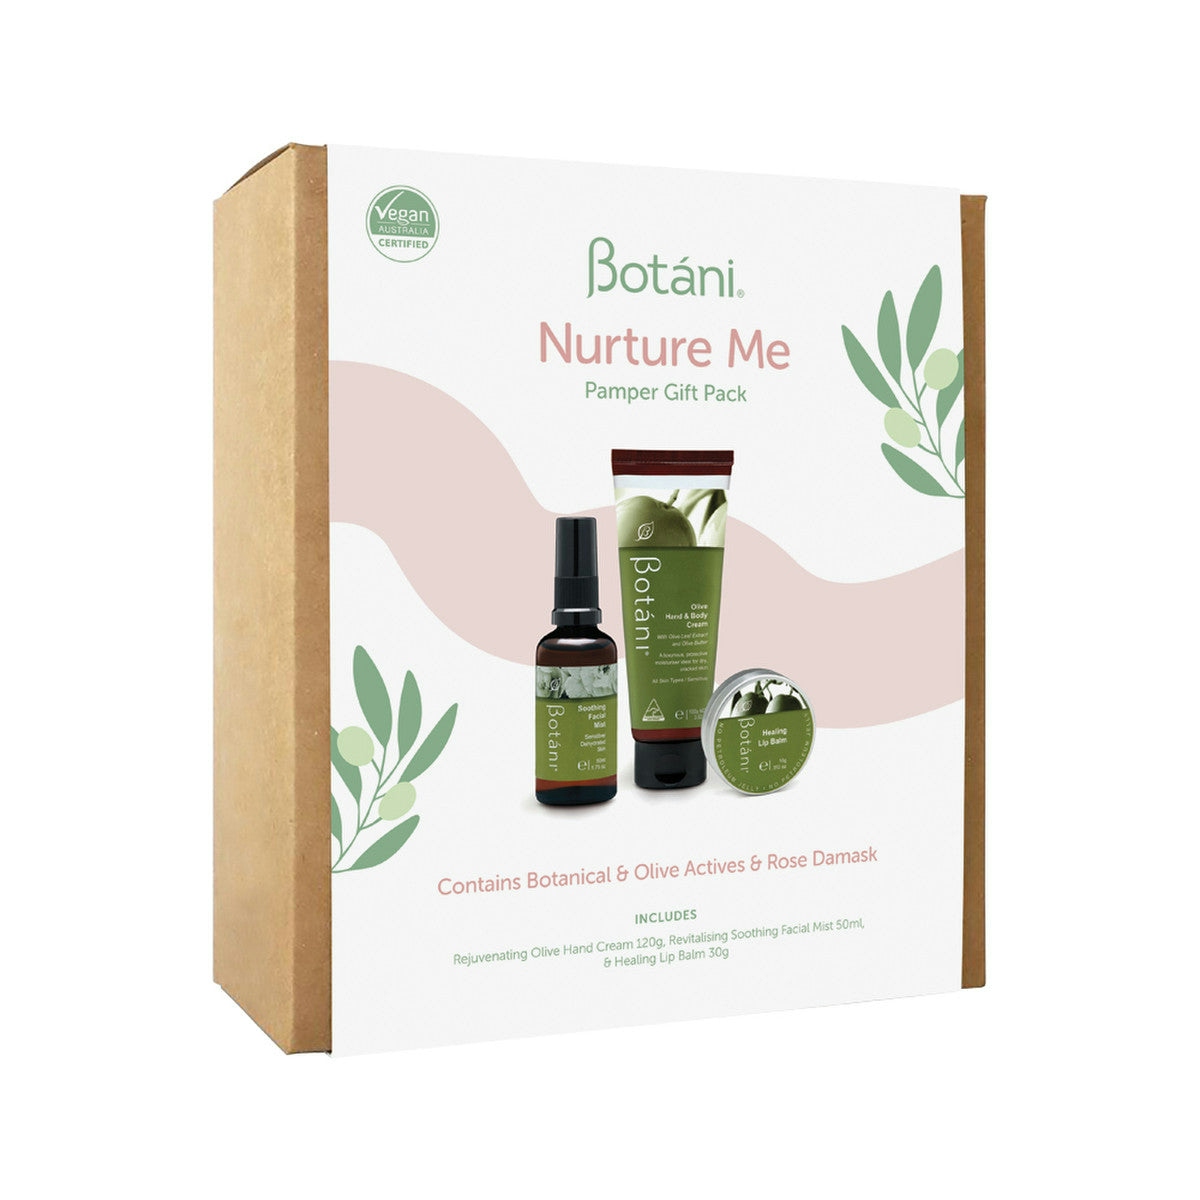 image of Botani Nurture Me Pamper Gift Pack (contains: Olive Hand Cream, Healing Lip Balm & Soothing Facial Mist) on white background